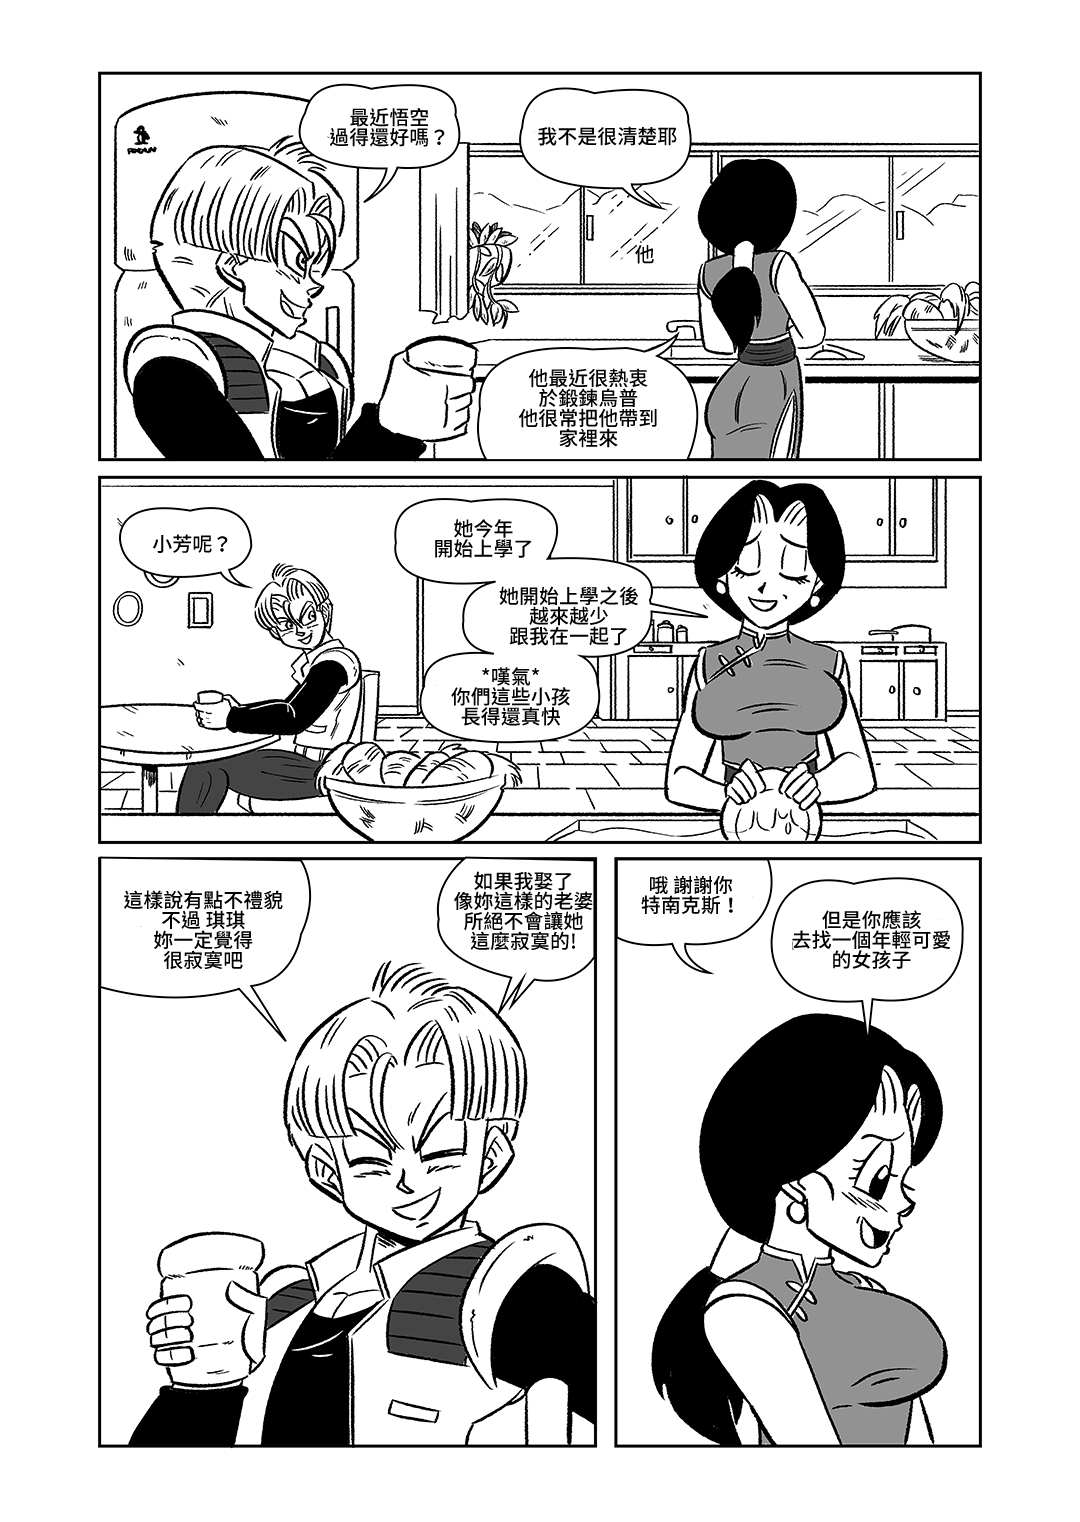 [Funsexydragonball] The Switch Up  (Dragon Ball Z)[Chinese] 5